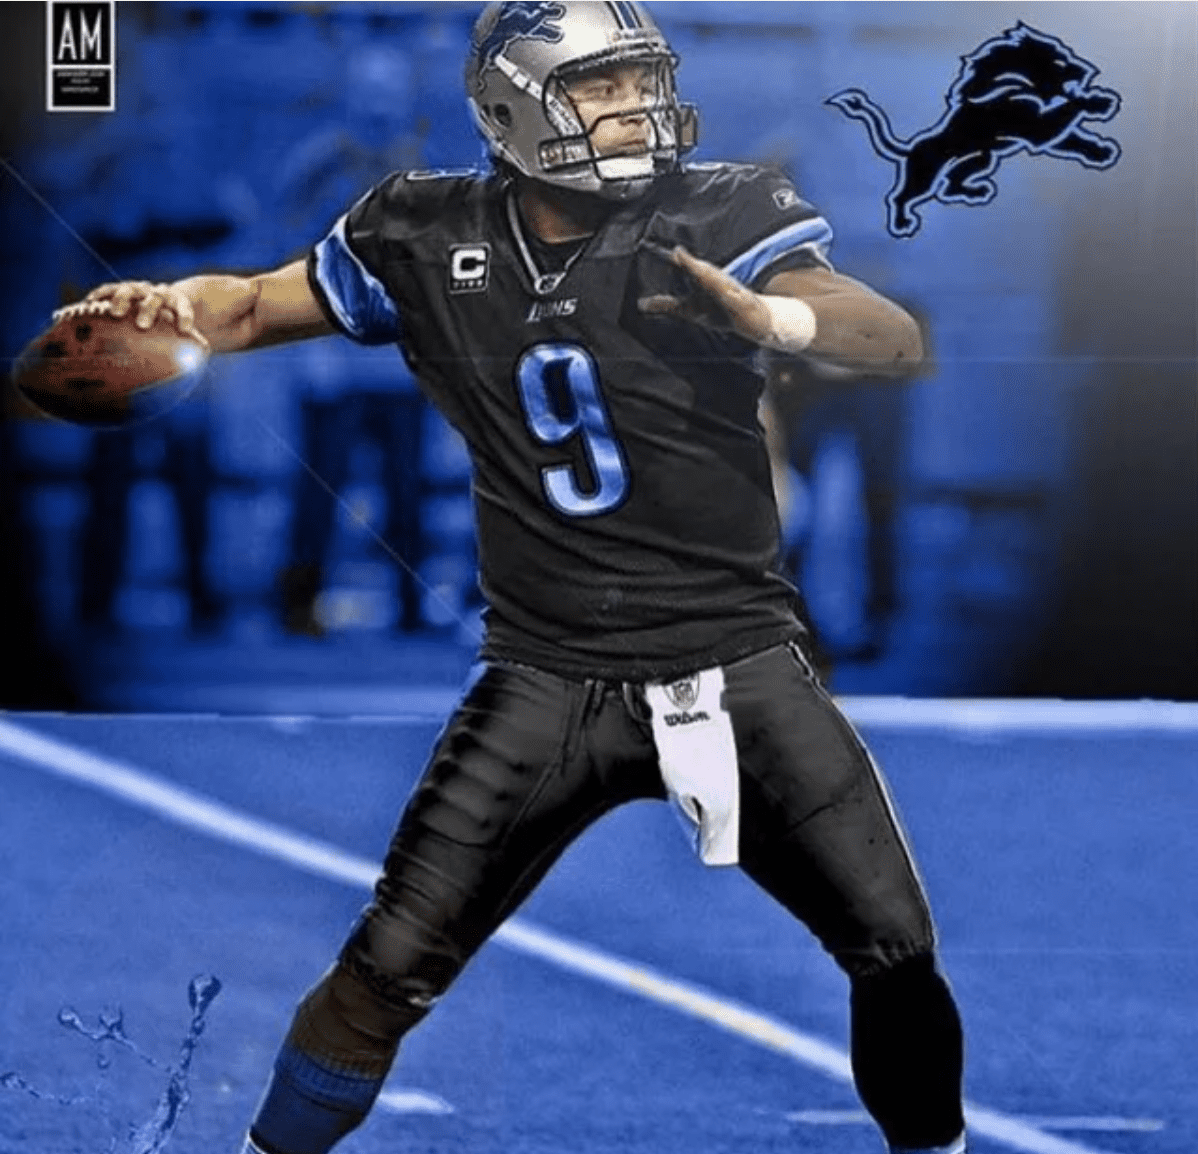 Detroit Lions perfect alternate helmet and jersey combination